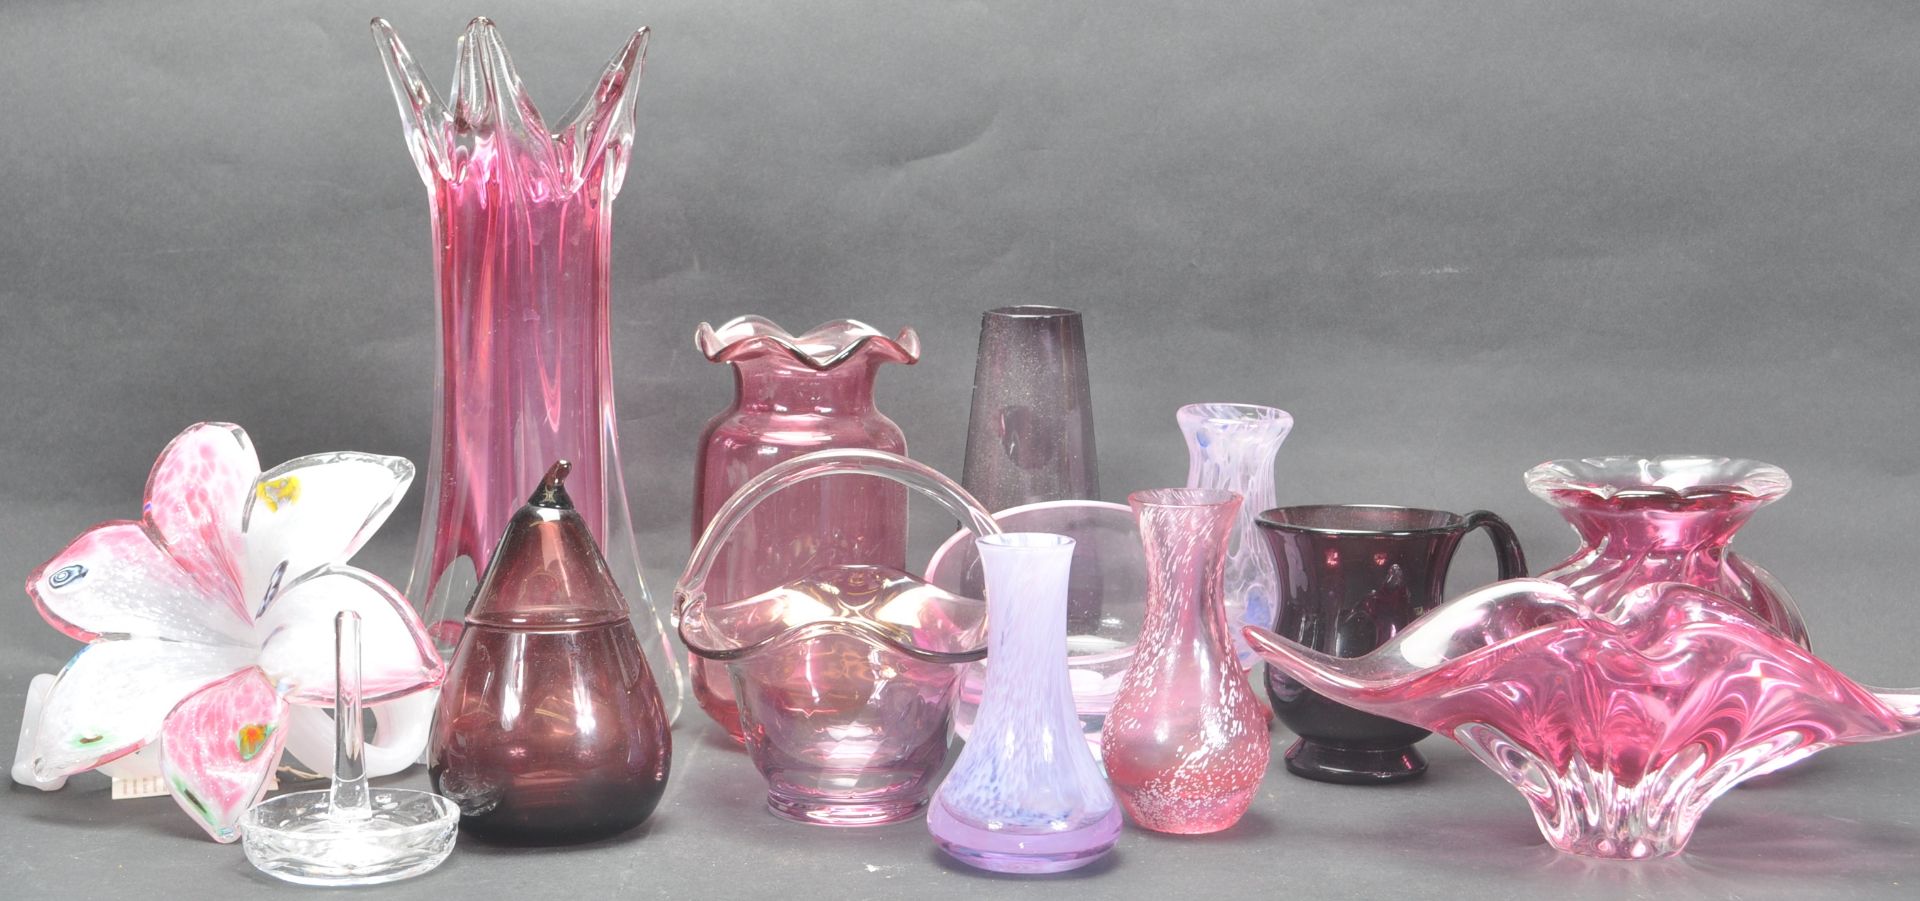 COLLECTION OF 20TH CENTURY GLASS VASES AND ORNAMENTS.